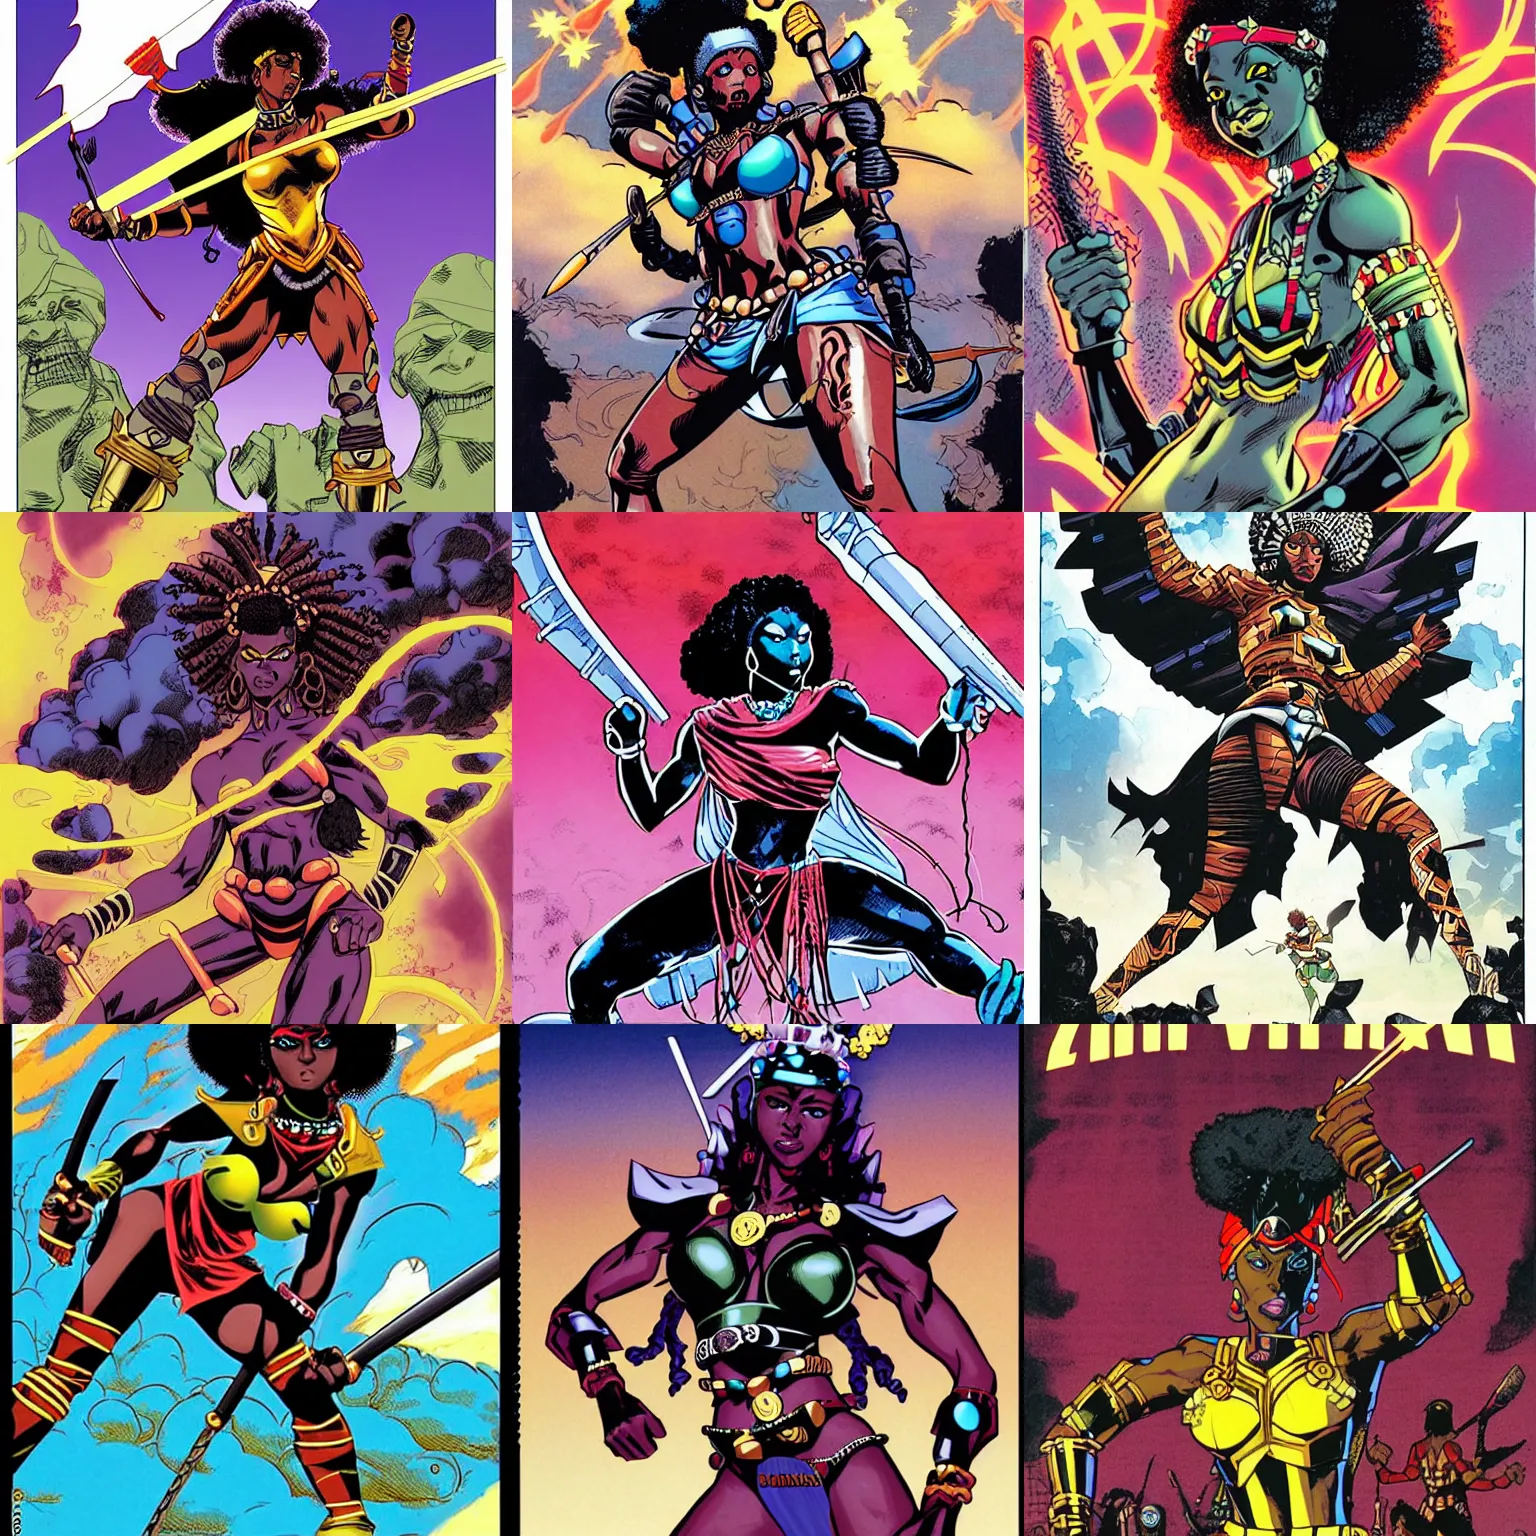 Prompt: epic composition comic book manga cover art illustration of an afro futuristic Zulu warrior queen fighting on the front lines, high energy, by Brian Stelfreeze and Mike Mignola and Dwayne Mcduffie